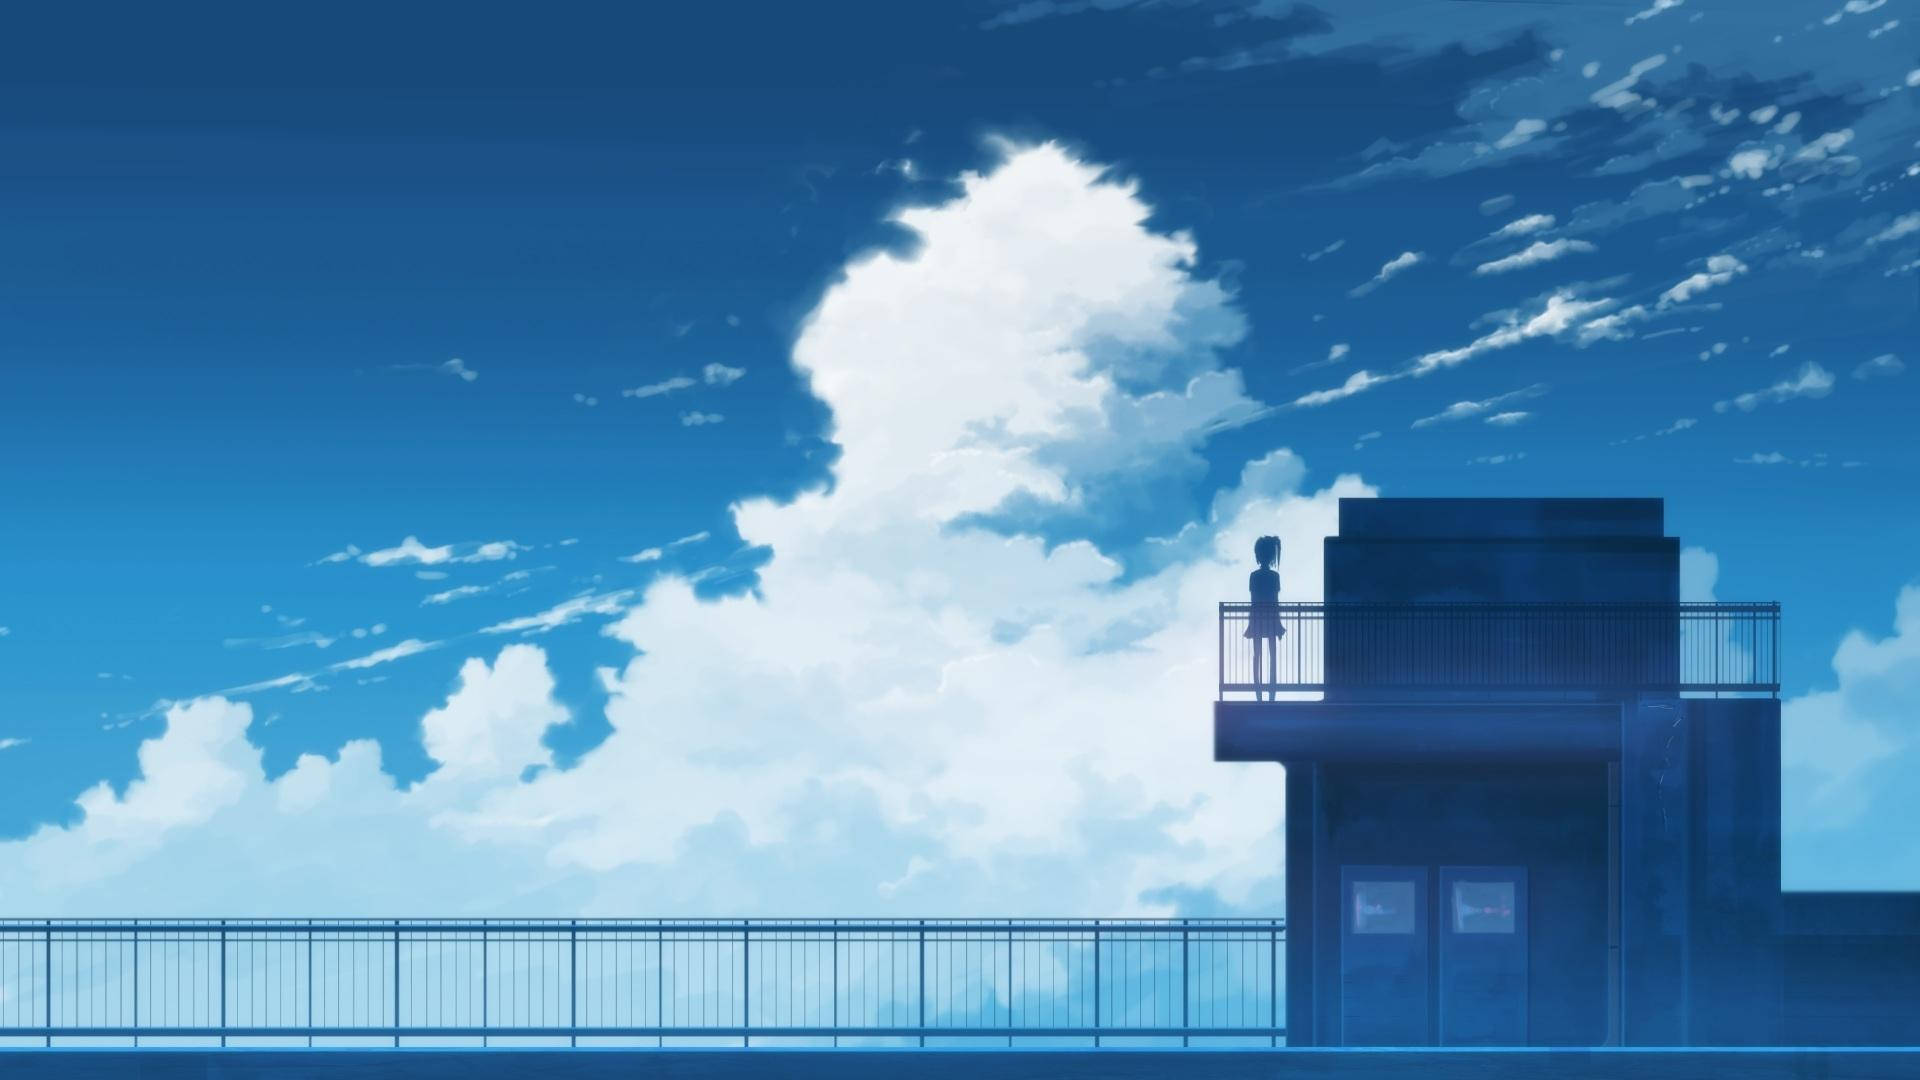 Download Anime School Scenery Student At Rooftop Wallpaper 